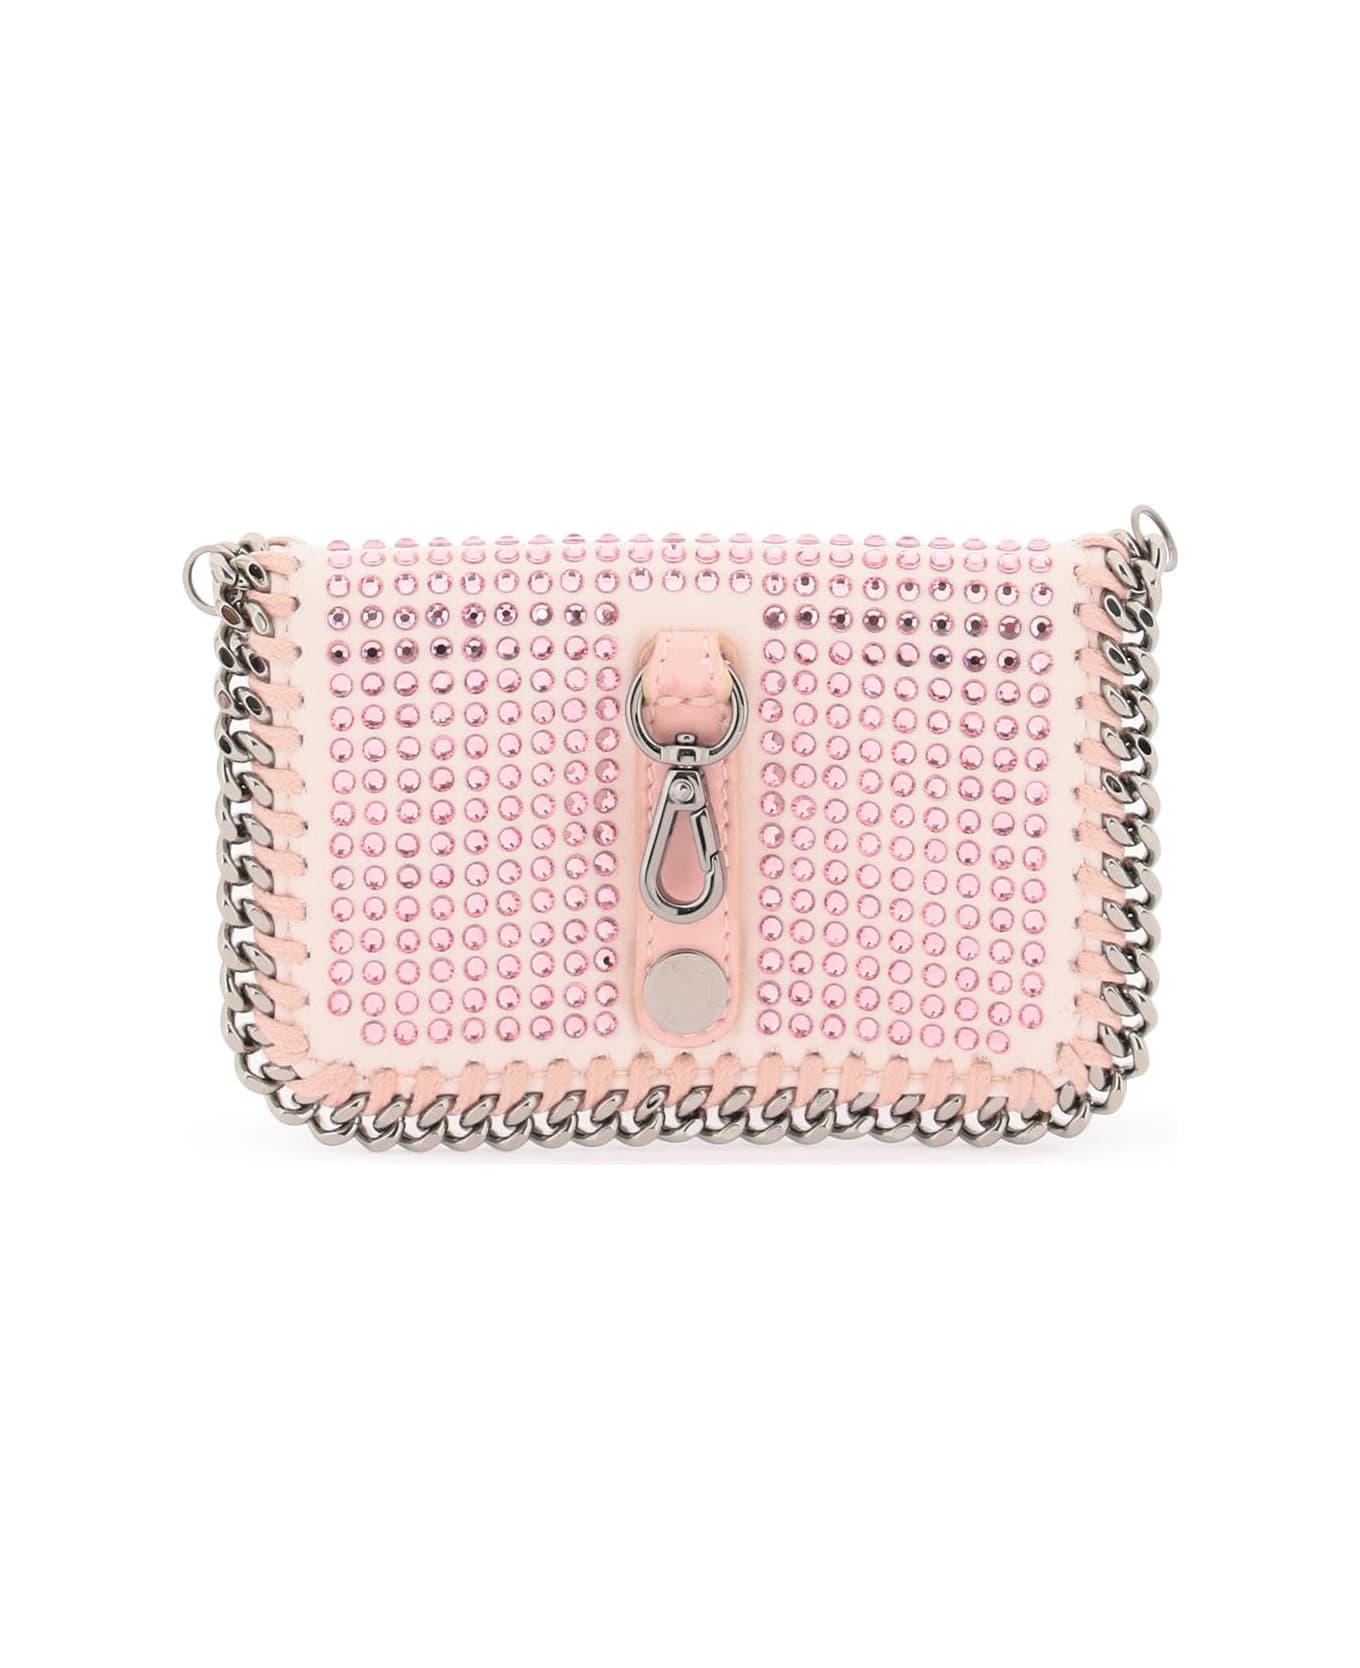 Stella McCartney 'falabella' Cardholder With Crystals - ROSE (Silver)